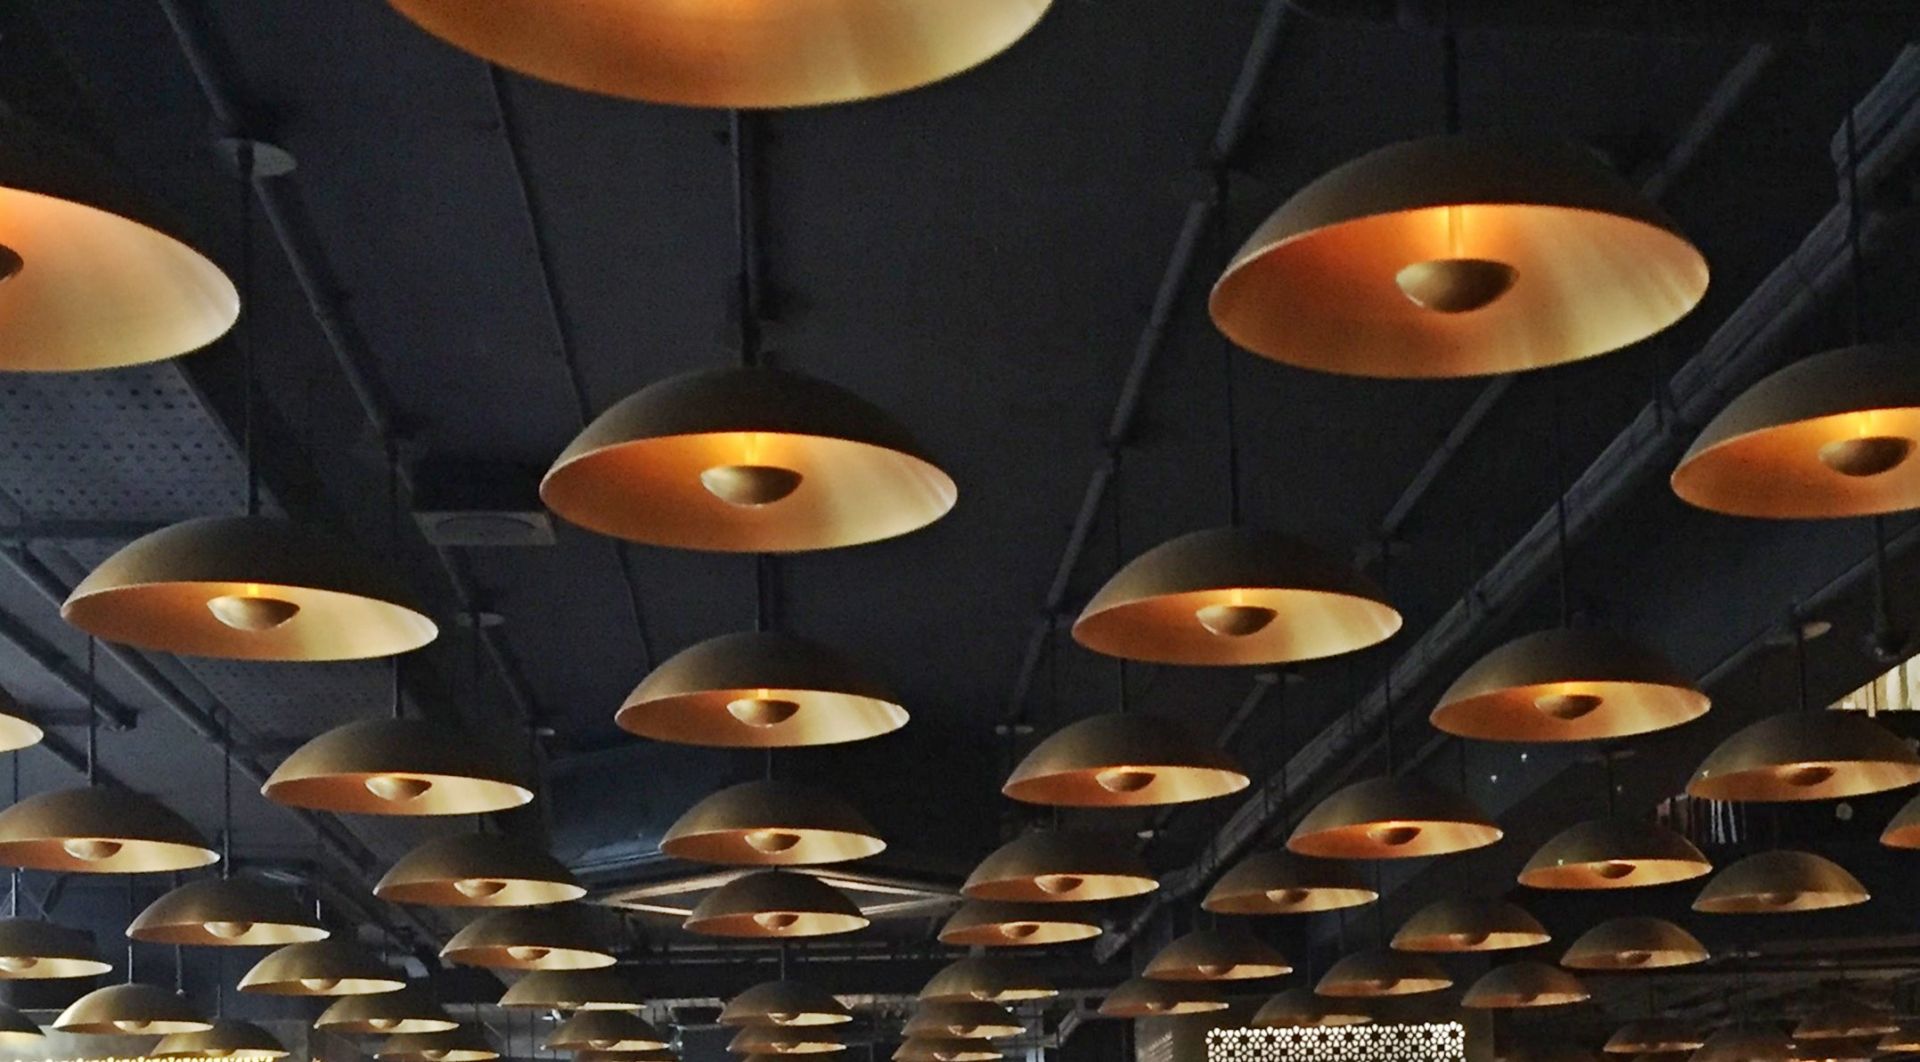 20 x Brass Effect Suspended Ceiling Light Pendant - High Quality Light Fittings With Metal - Image 8 of 8